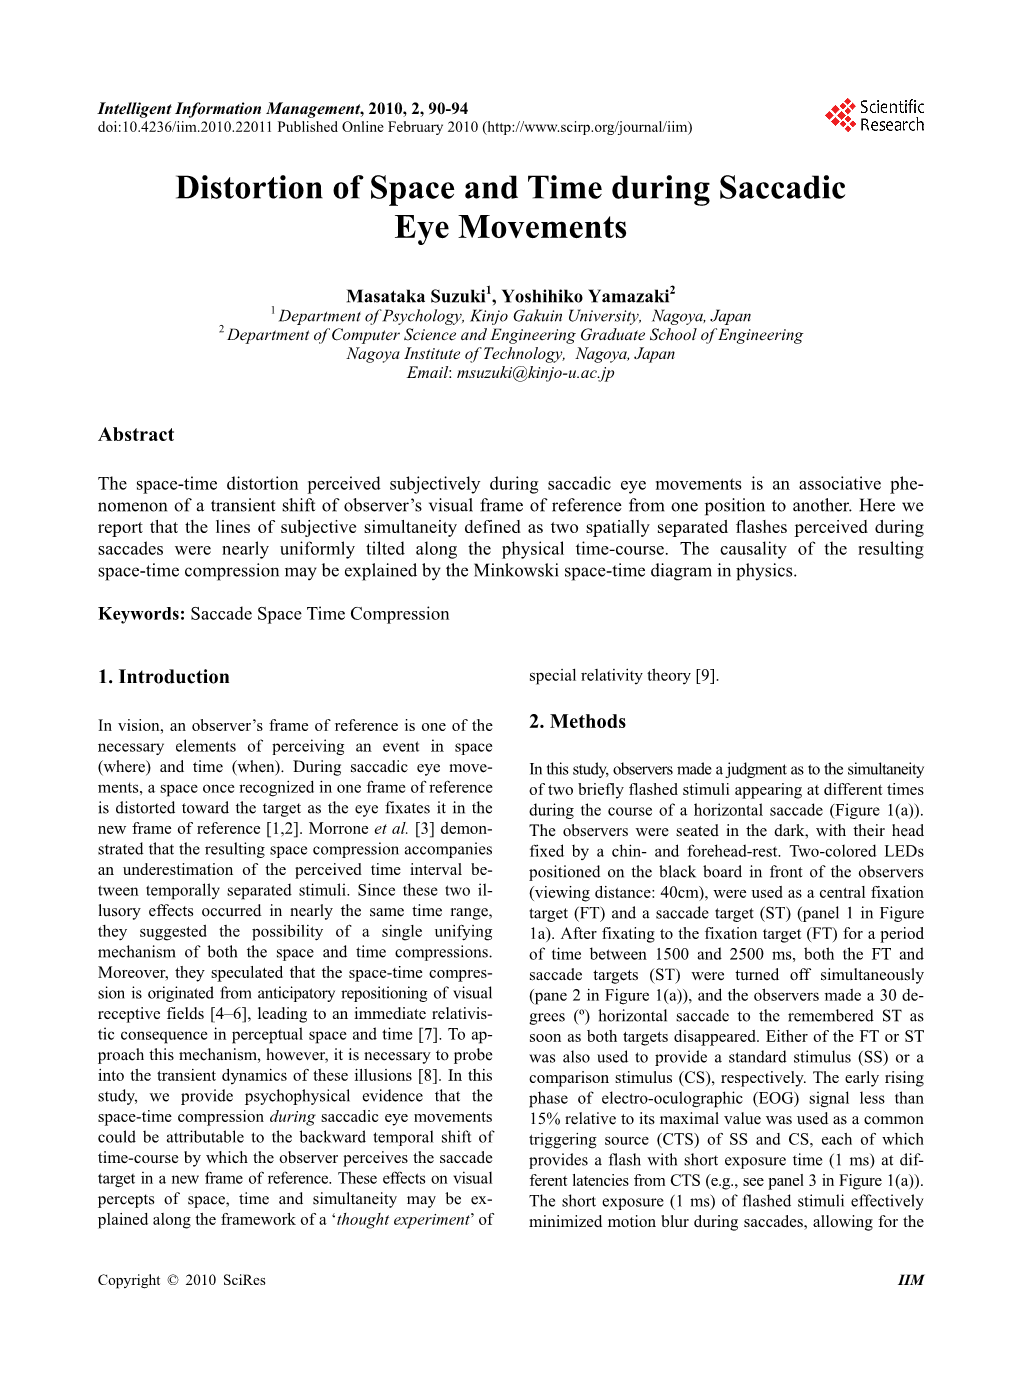 Distortion of Space and Time During Saccadic Eye Movements